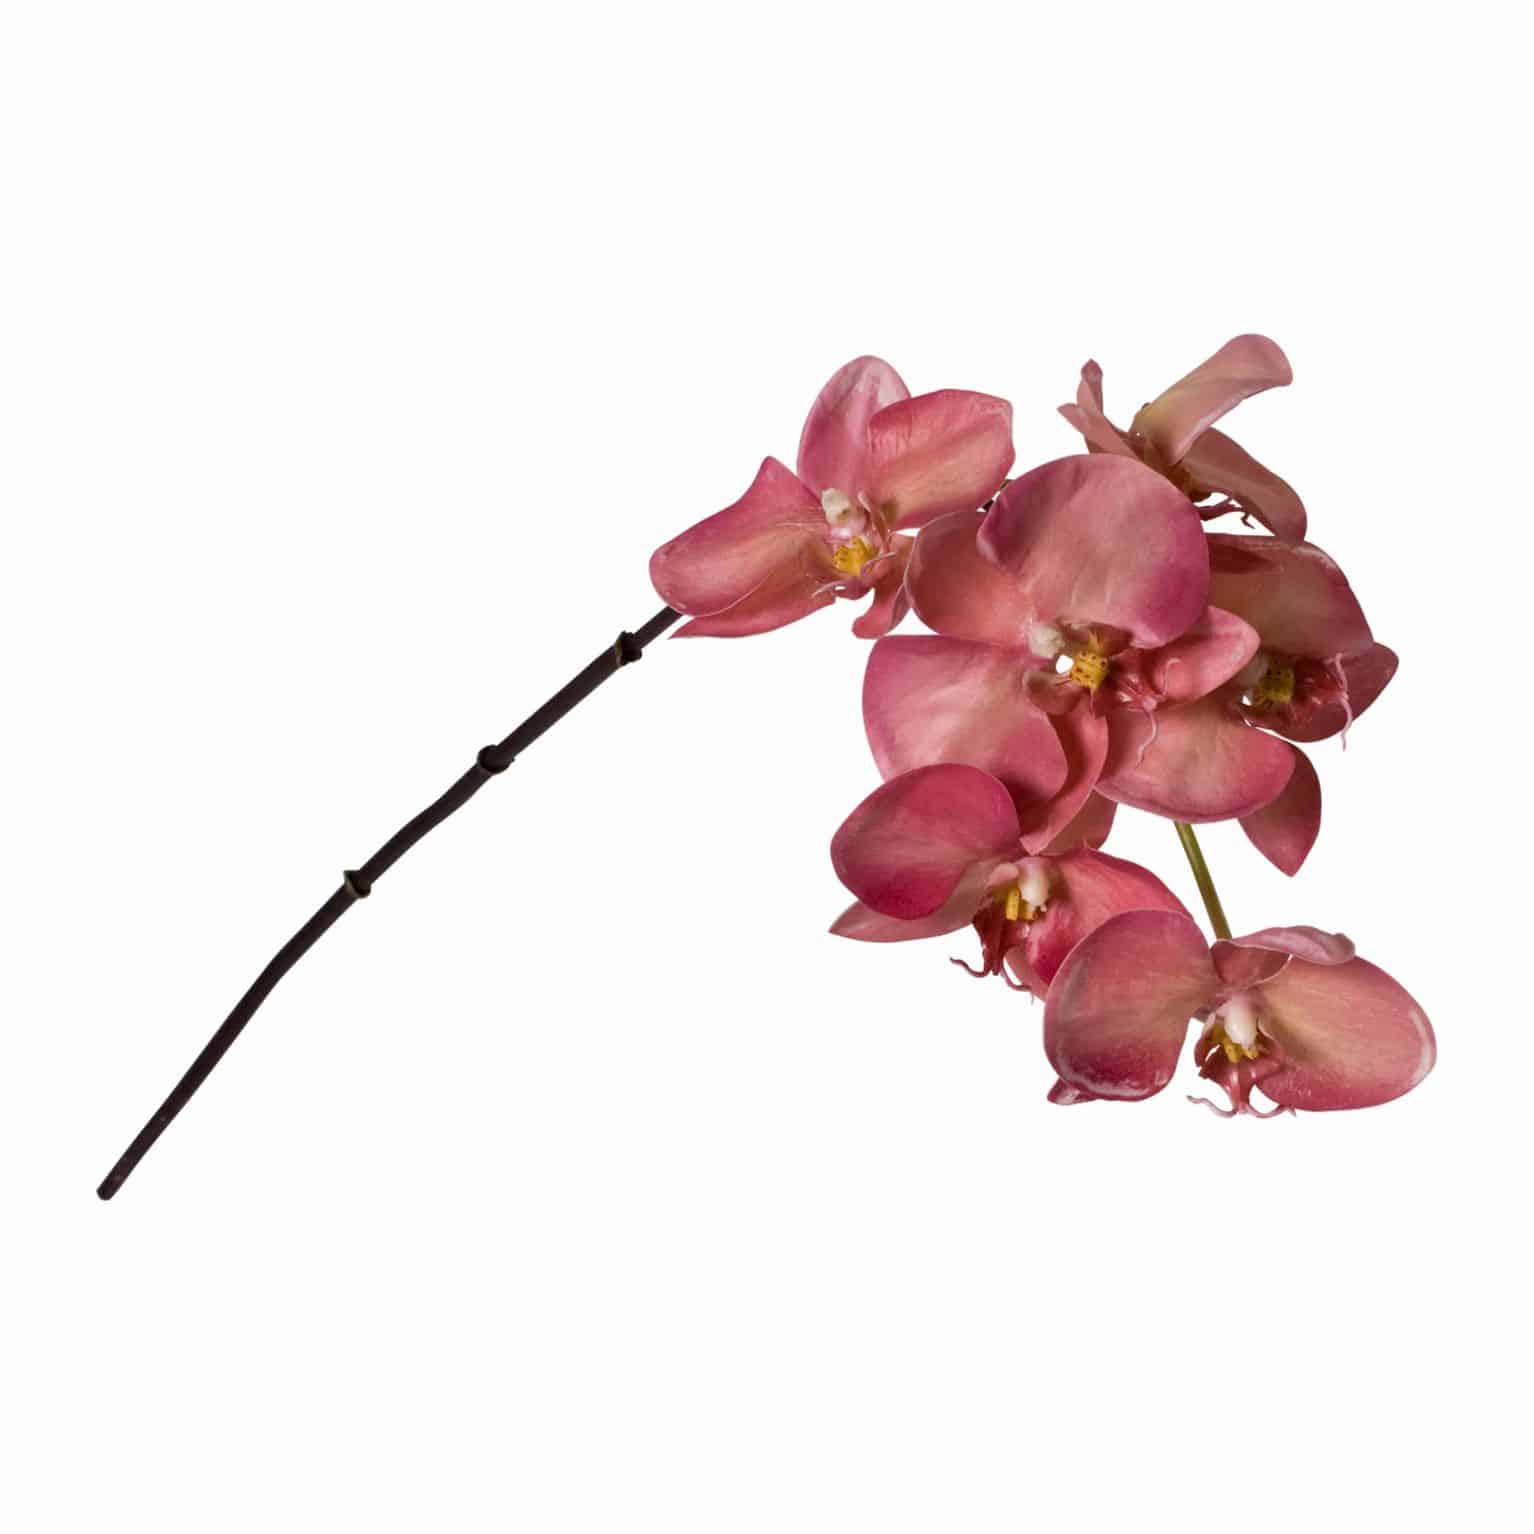 Buy our stunning mauve phalaenopsis orchid faux flower for your arrangements. Flawless pollen and natural colours